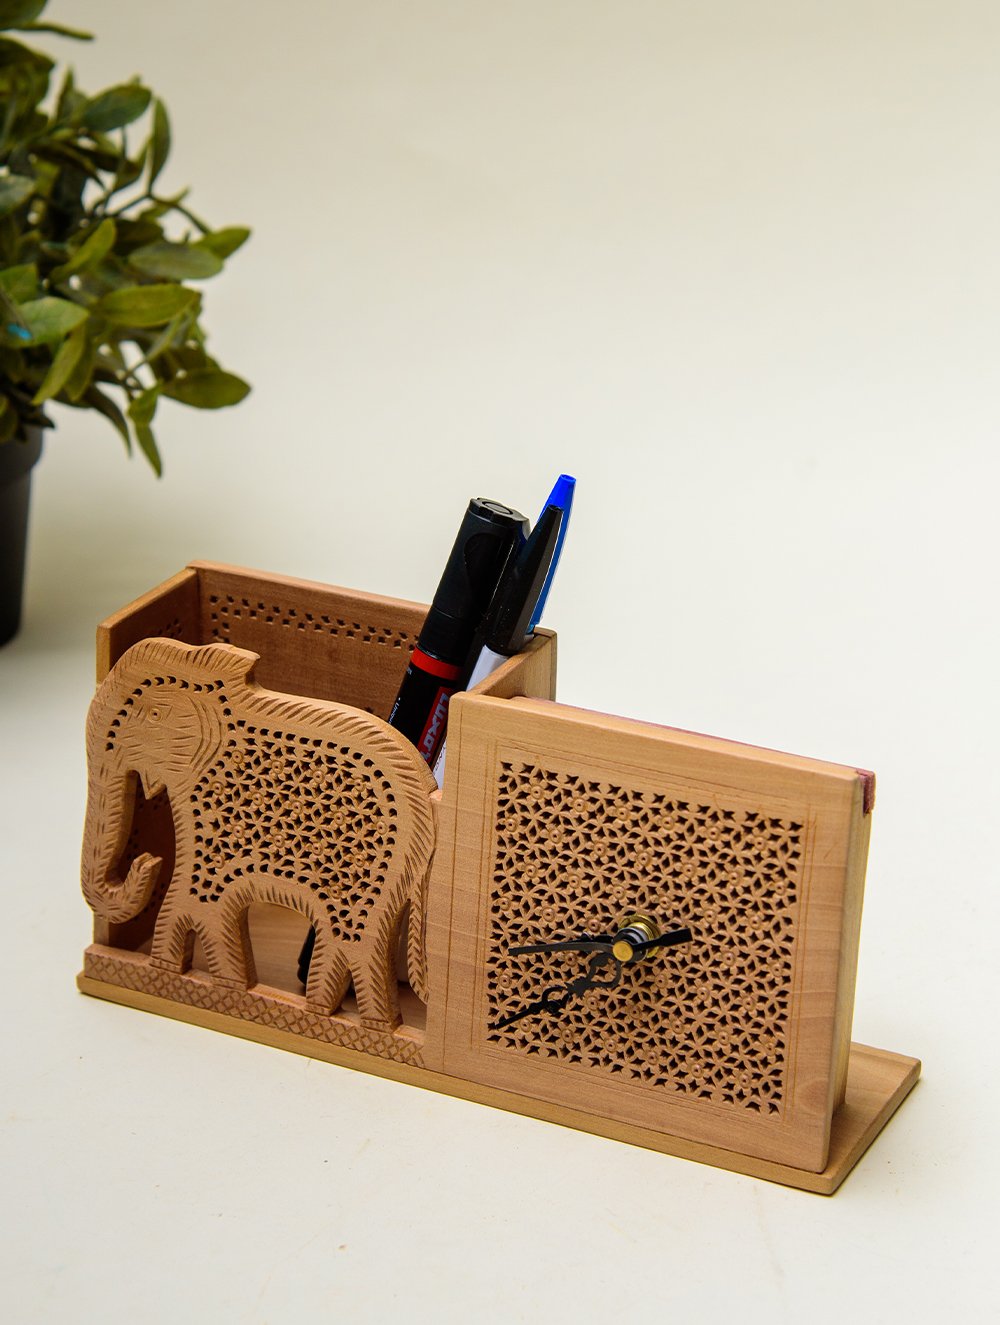 Load image into Gallery viewer, The India Craft House Intricate, Wooden Jaali Elephant Pen Stand with Clock